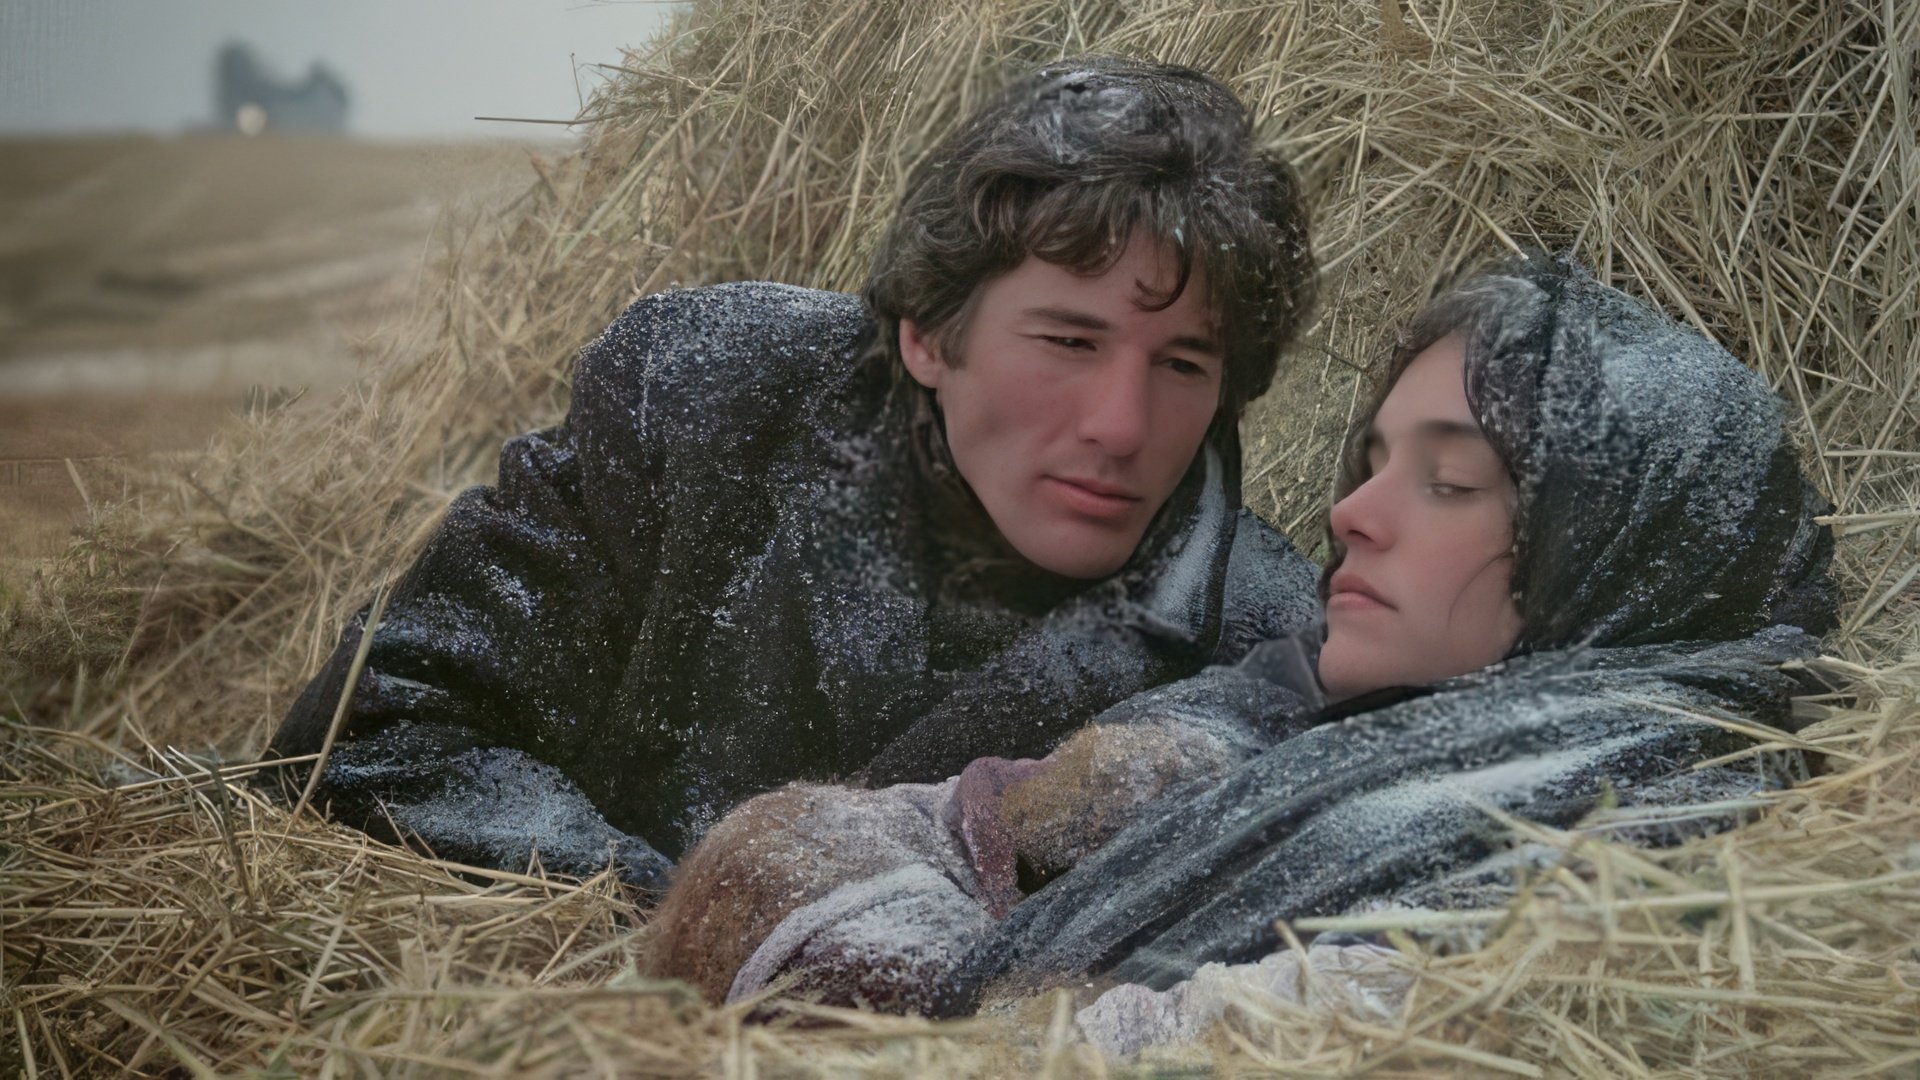 A shot from the Days of Heaven